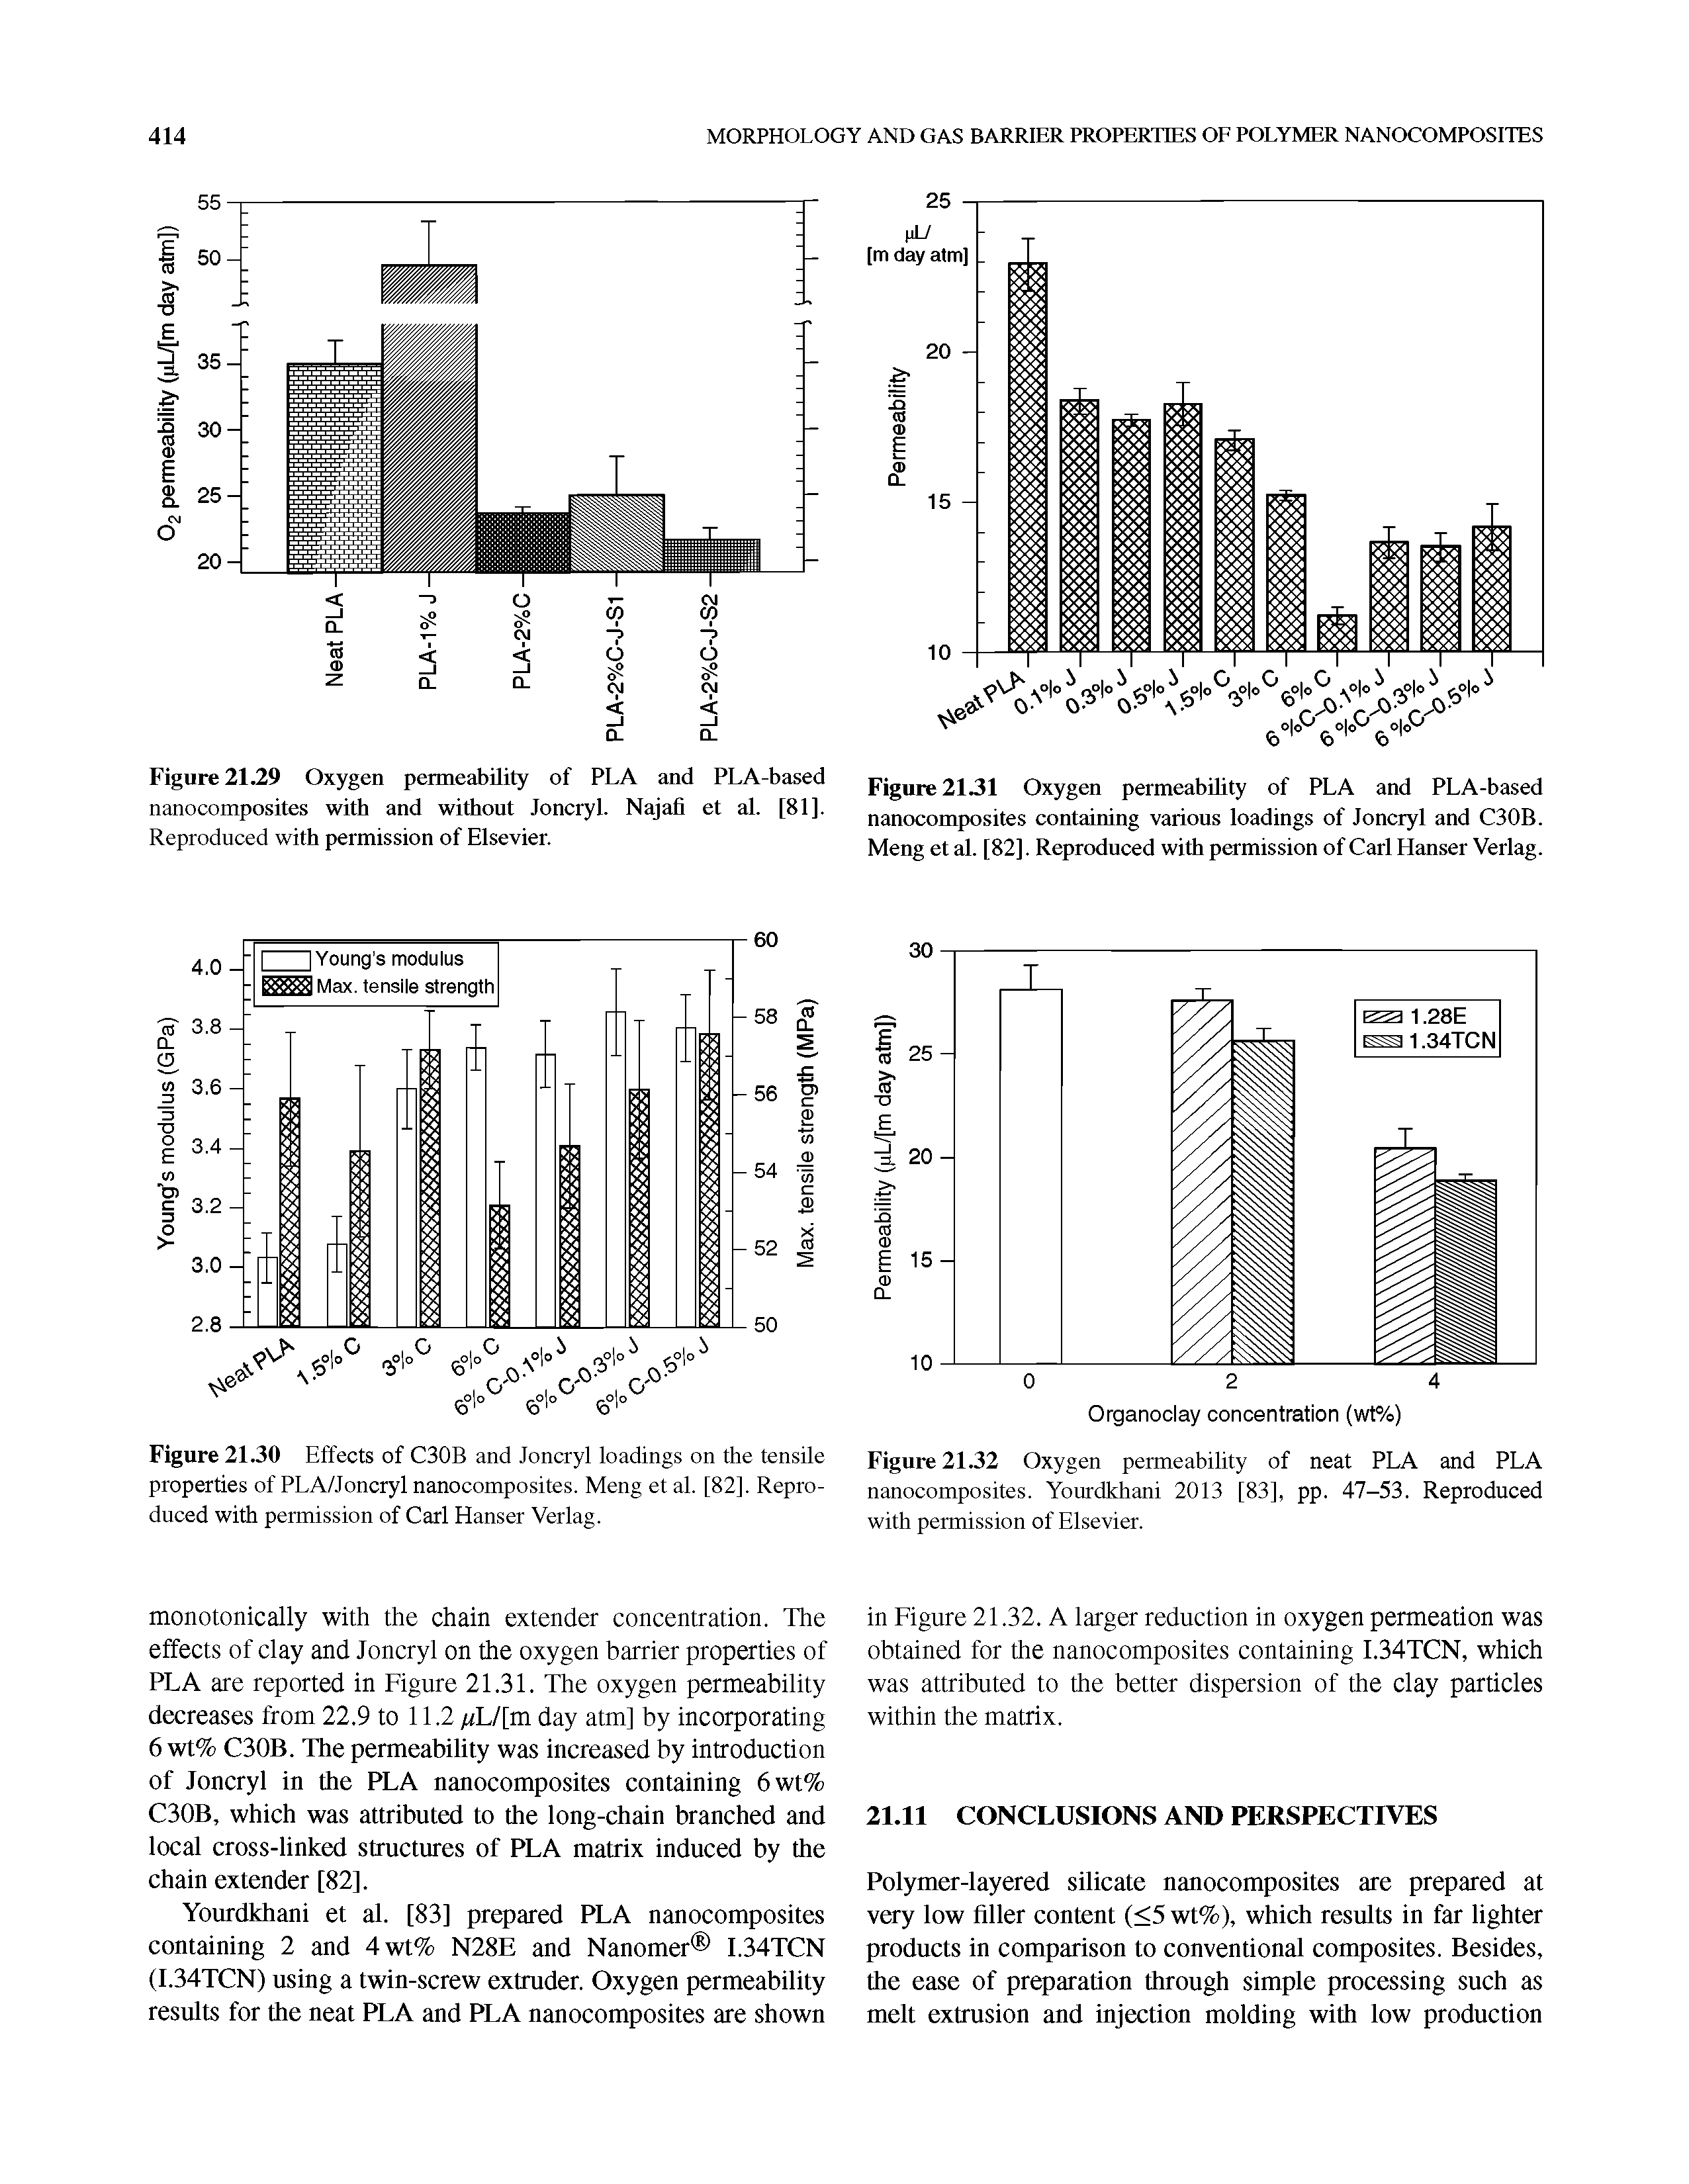 Figure 2131 Oxygen permeabdity of PLA and PLA-based nanocomposites containing various loadings of Joncryl and C30B. Meng et al. [82], Reproduced with permission of Carl Hanser Verlag.